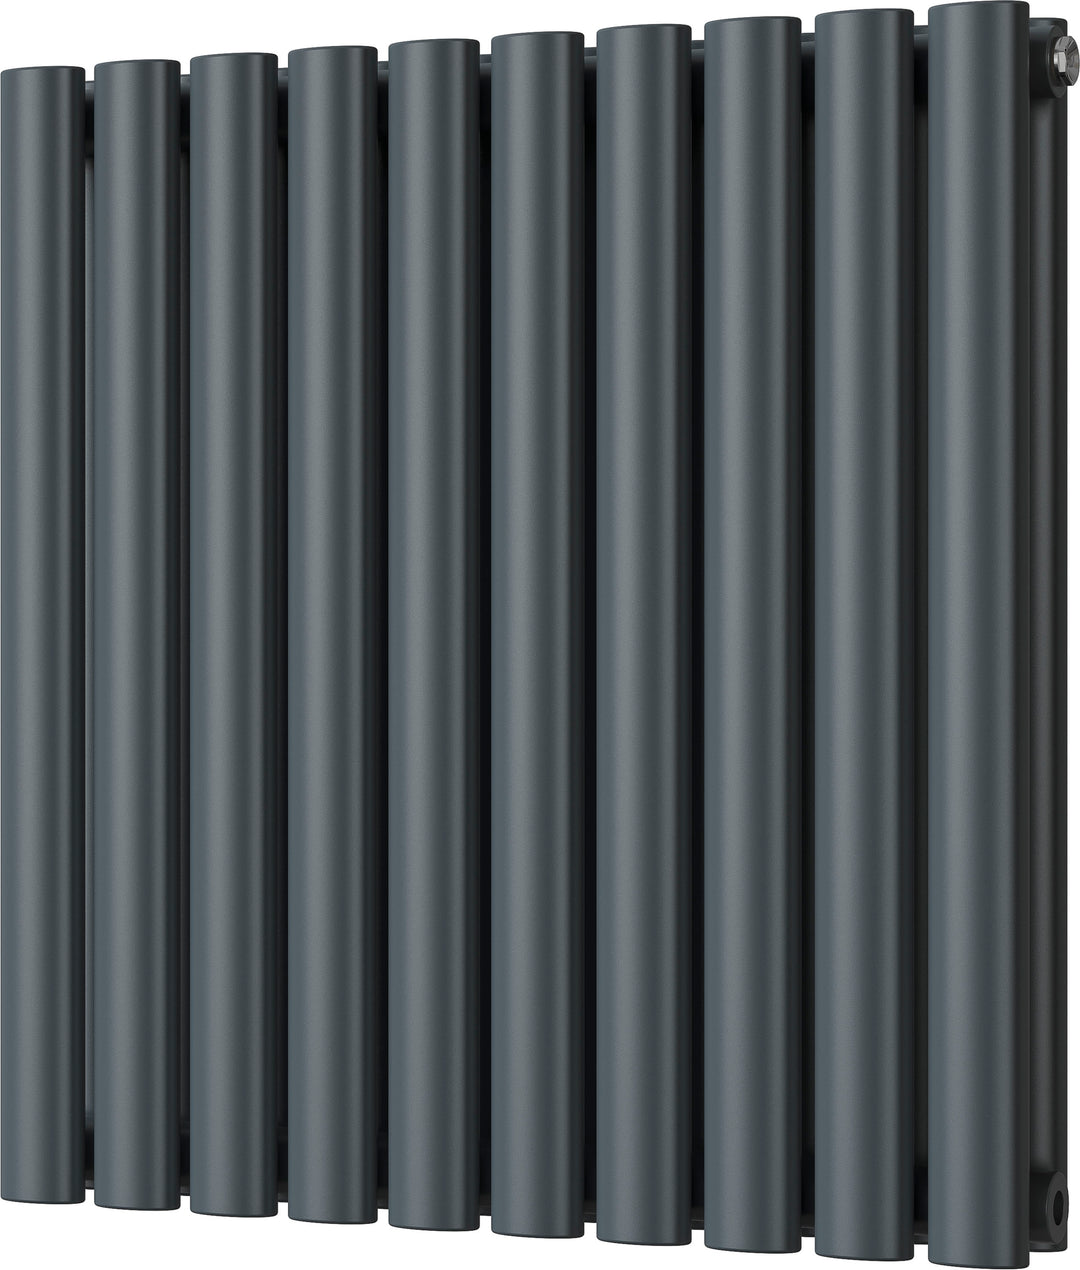 Omeara - Anthracite Horizontal Radiator H600mm x W580mm Double Panel